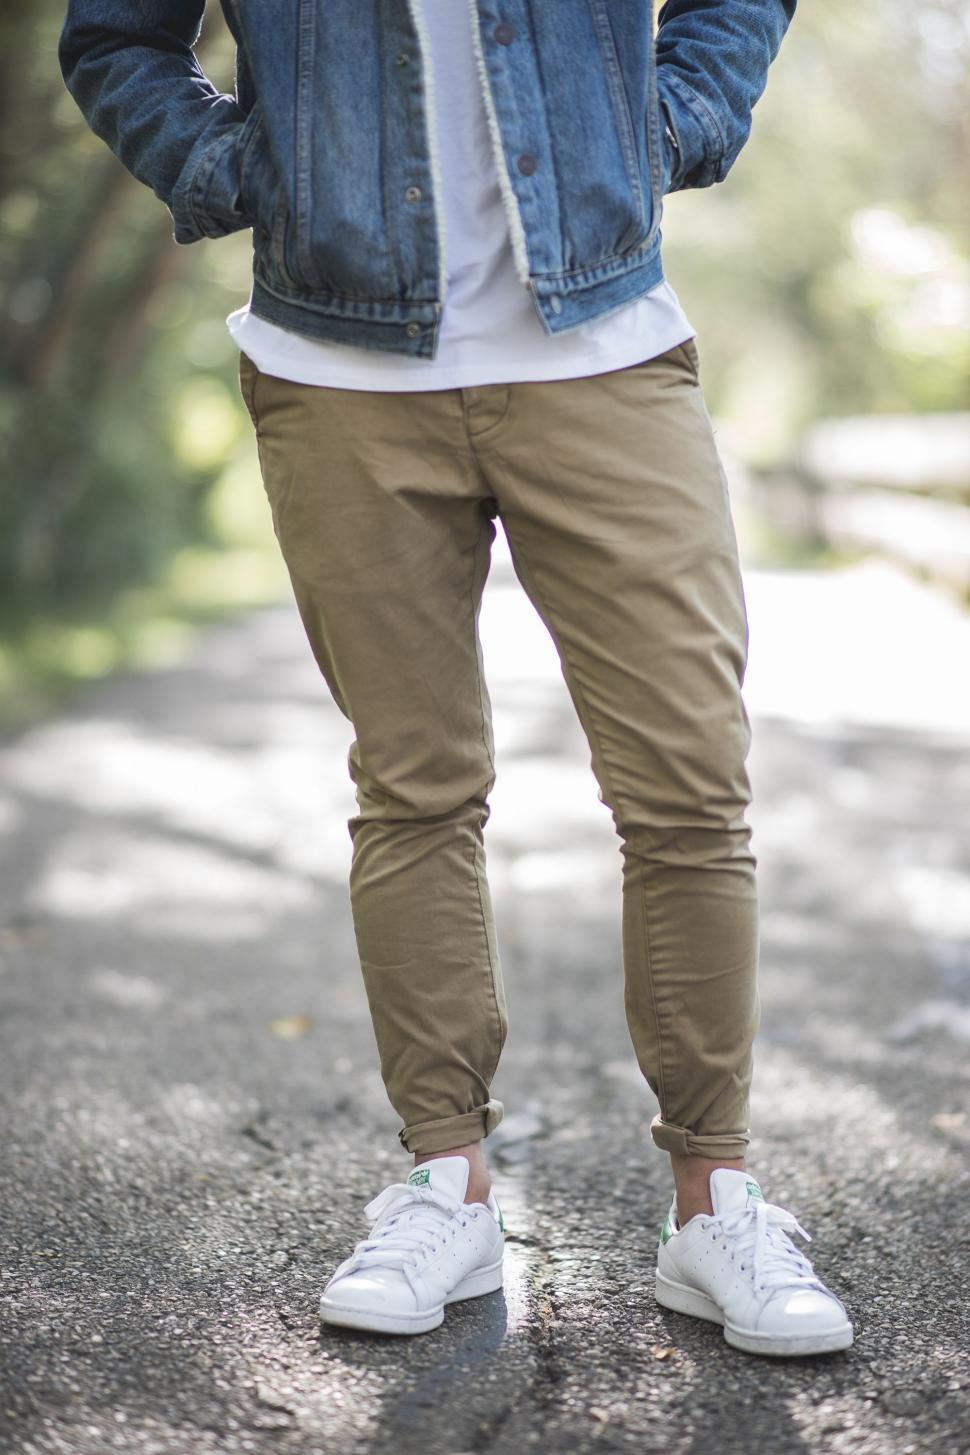 What Shoes to Wear with Khaki Pants? 16 Ideas | Khaki pants outfit women,  Chino pants women, Chinos women outfit